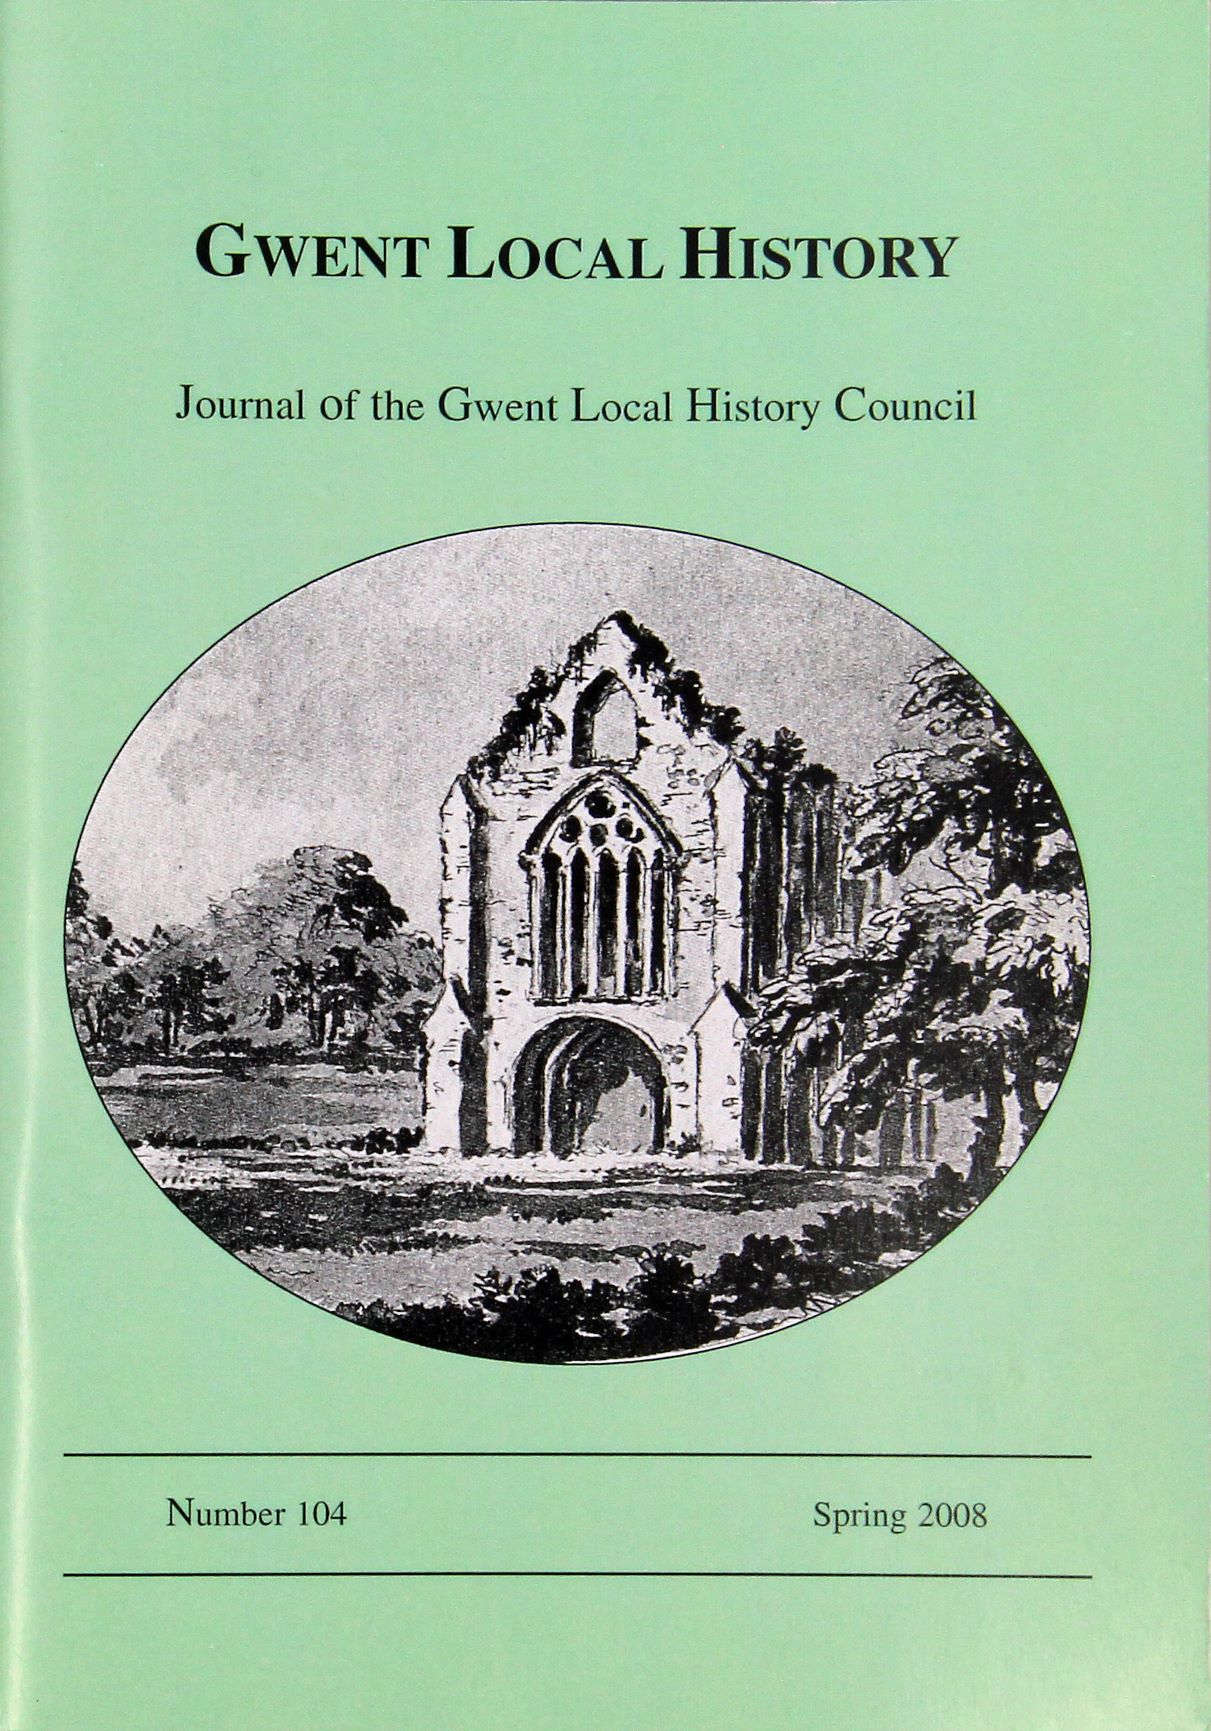 Gwent Local History: Journal of the Gwent Local History Council No.104, Spring 2008, £2.00